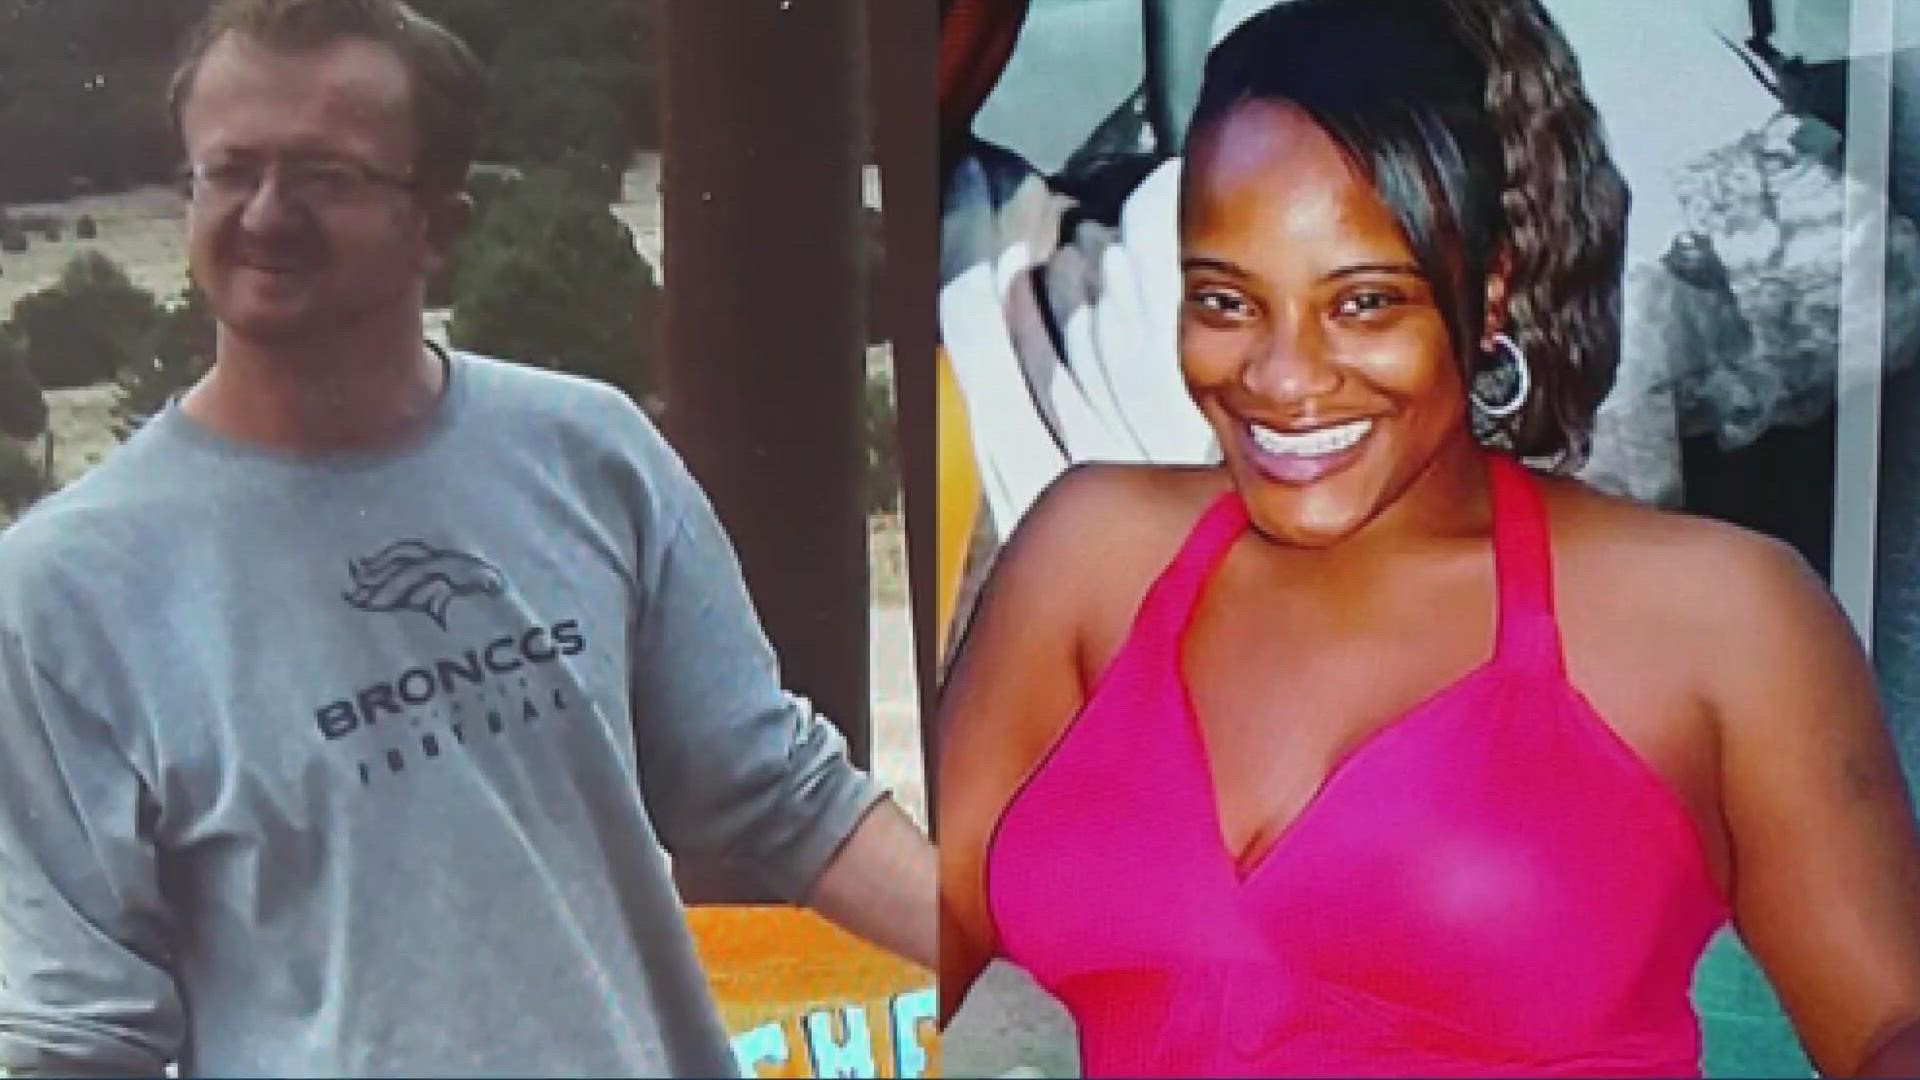 Nekeya Brown, who went by Tiffany, and Katon Hutt were found dead with gunshot wounds in a Boston Street apartment.